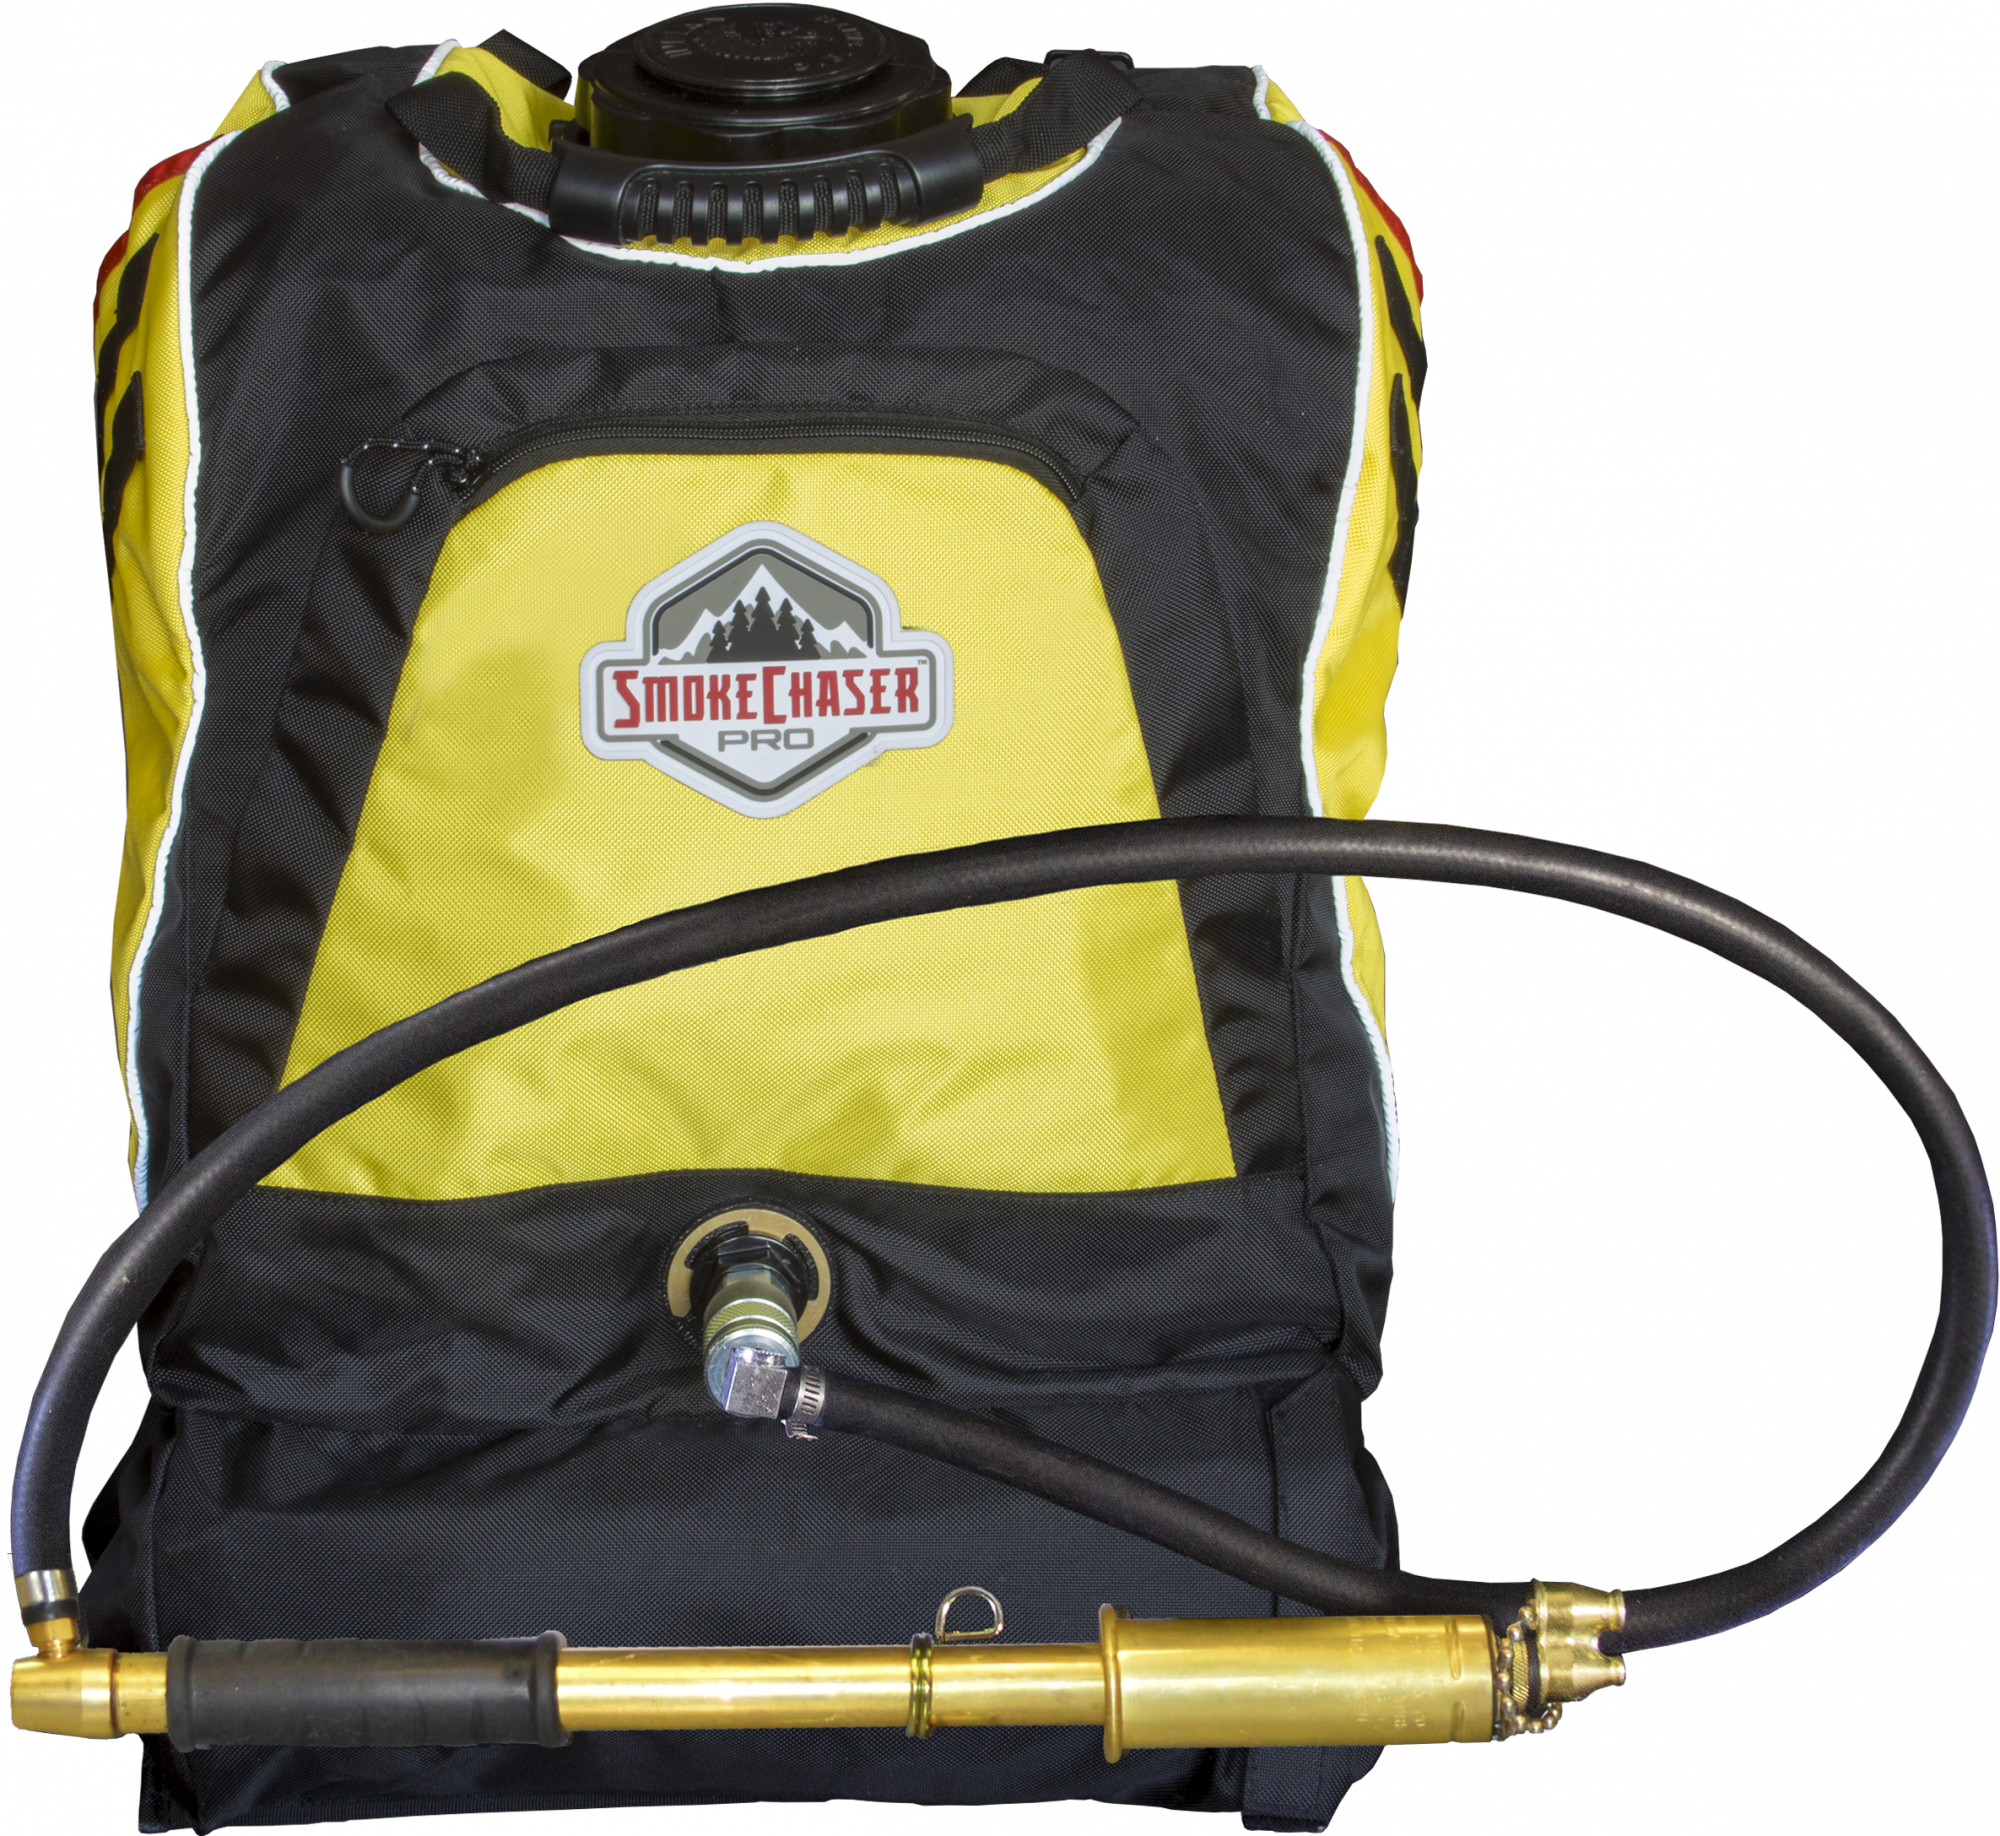 Indian SmokeChaser&trade; Pro 5-Gallon with FP100 Fire Pump, Model 190514